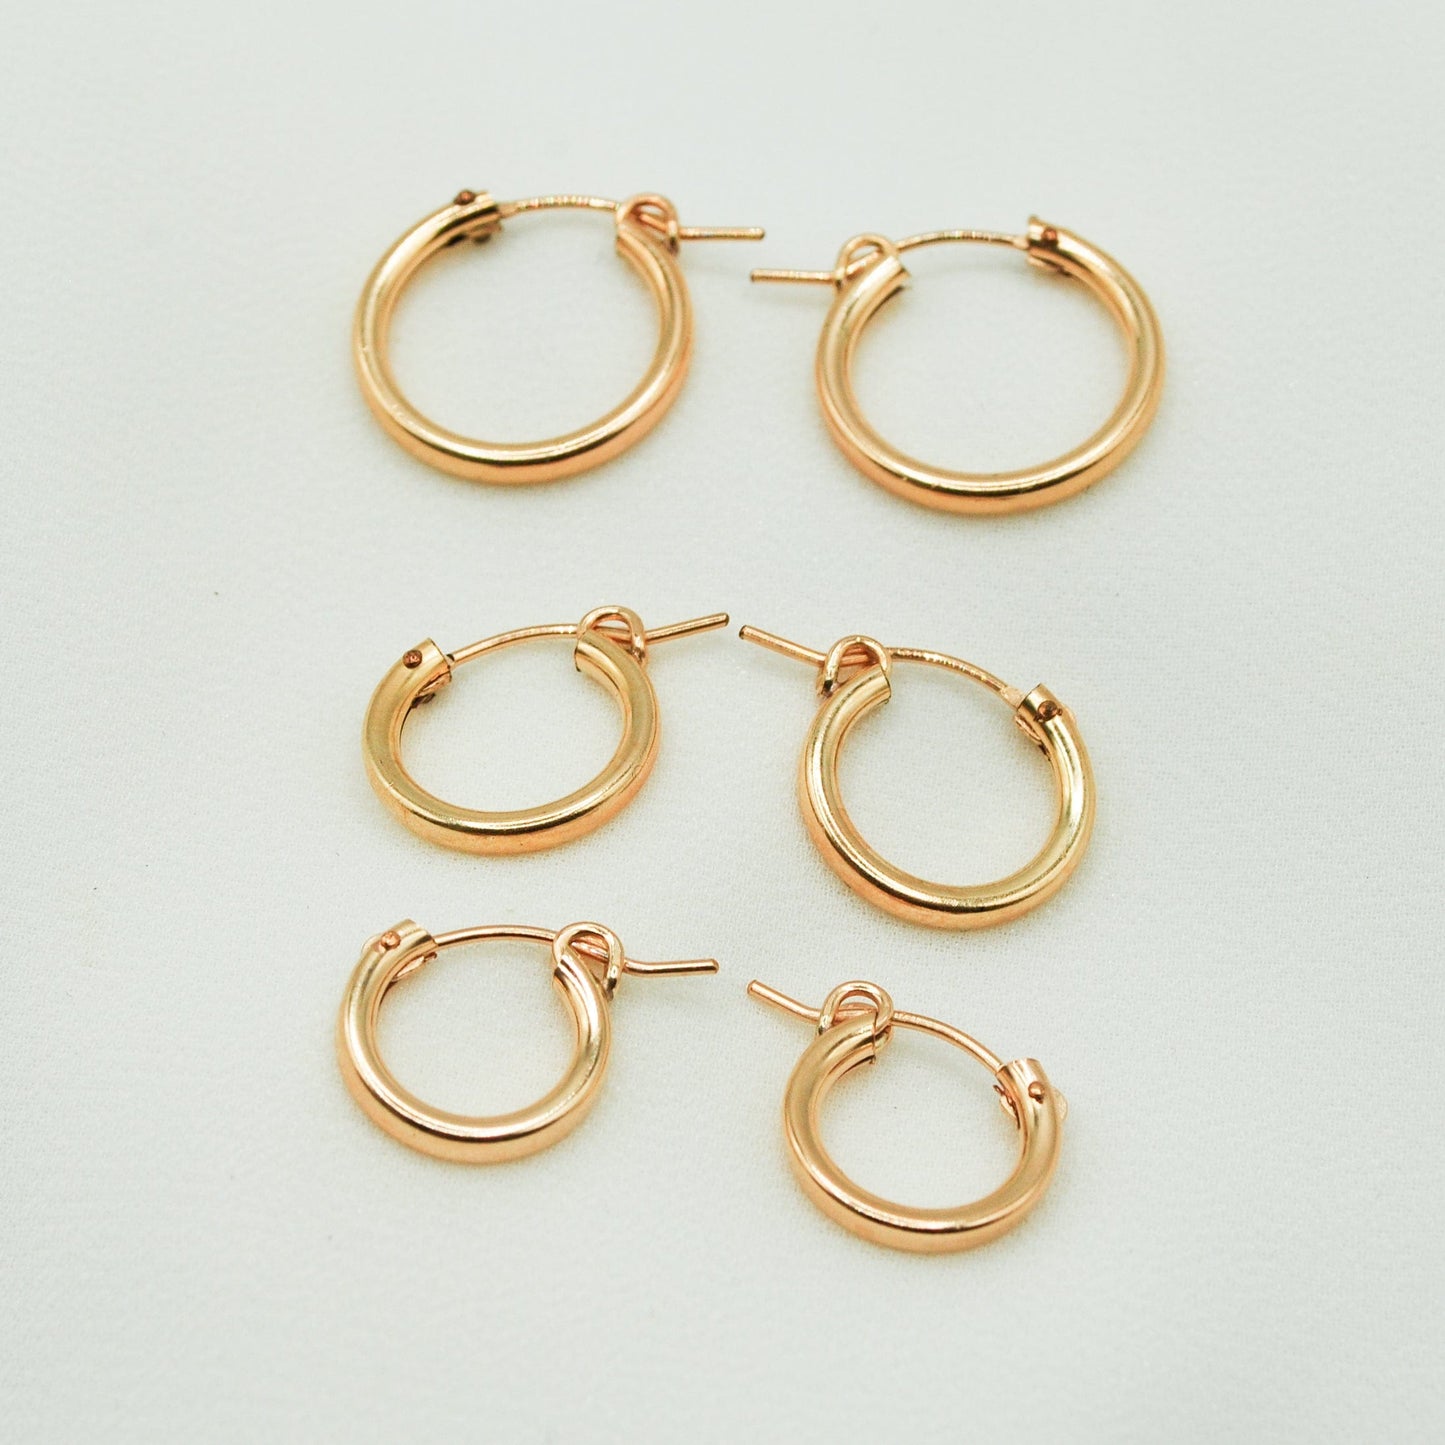 Calliope Hoops - Gold Filled